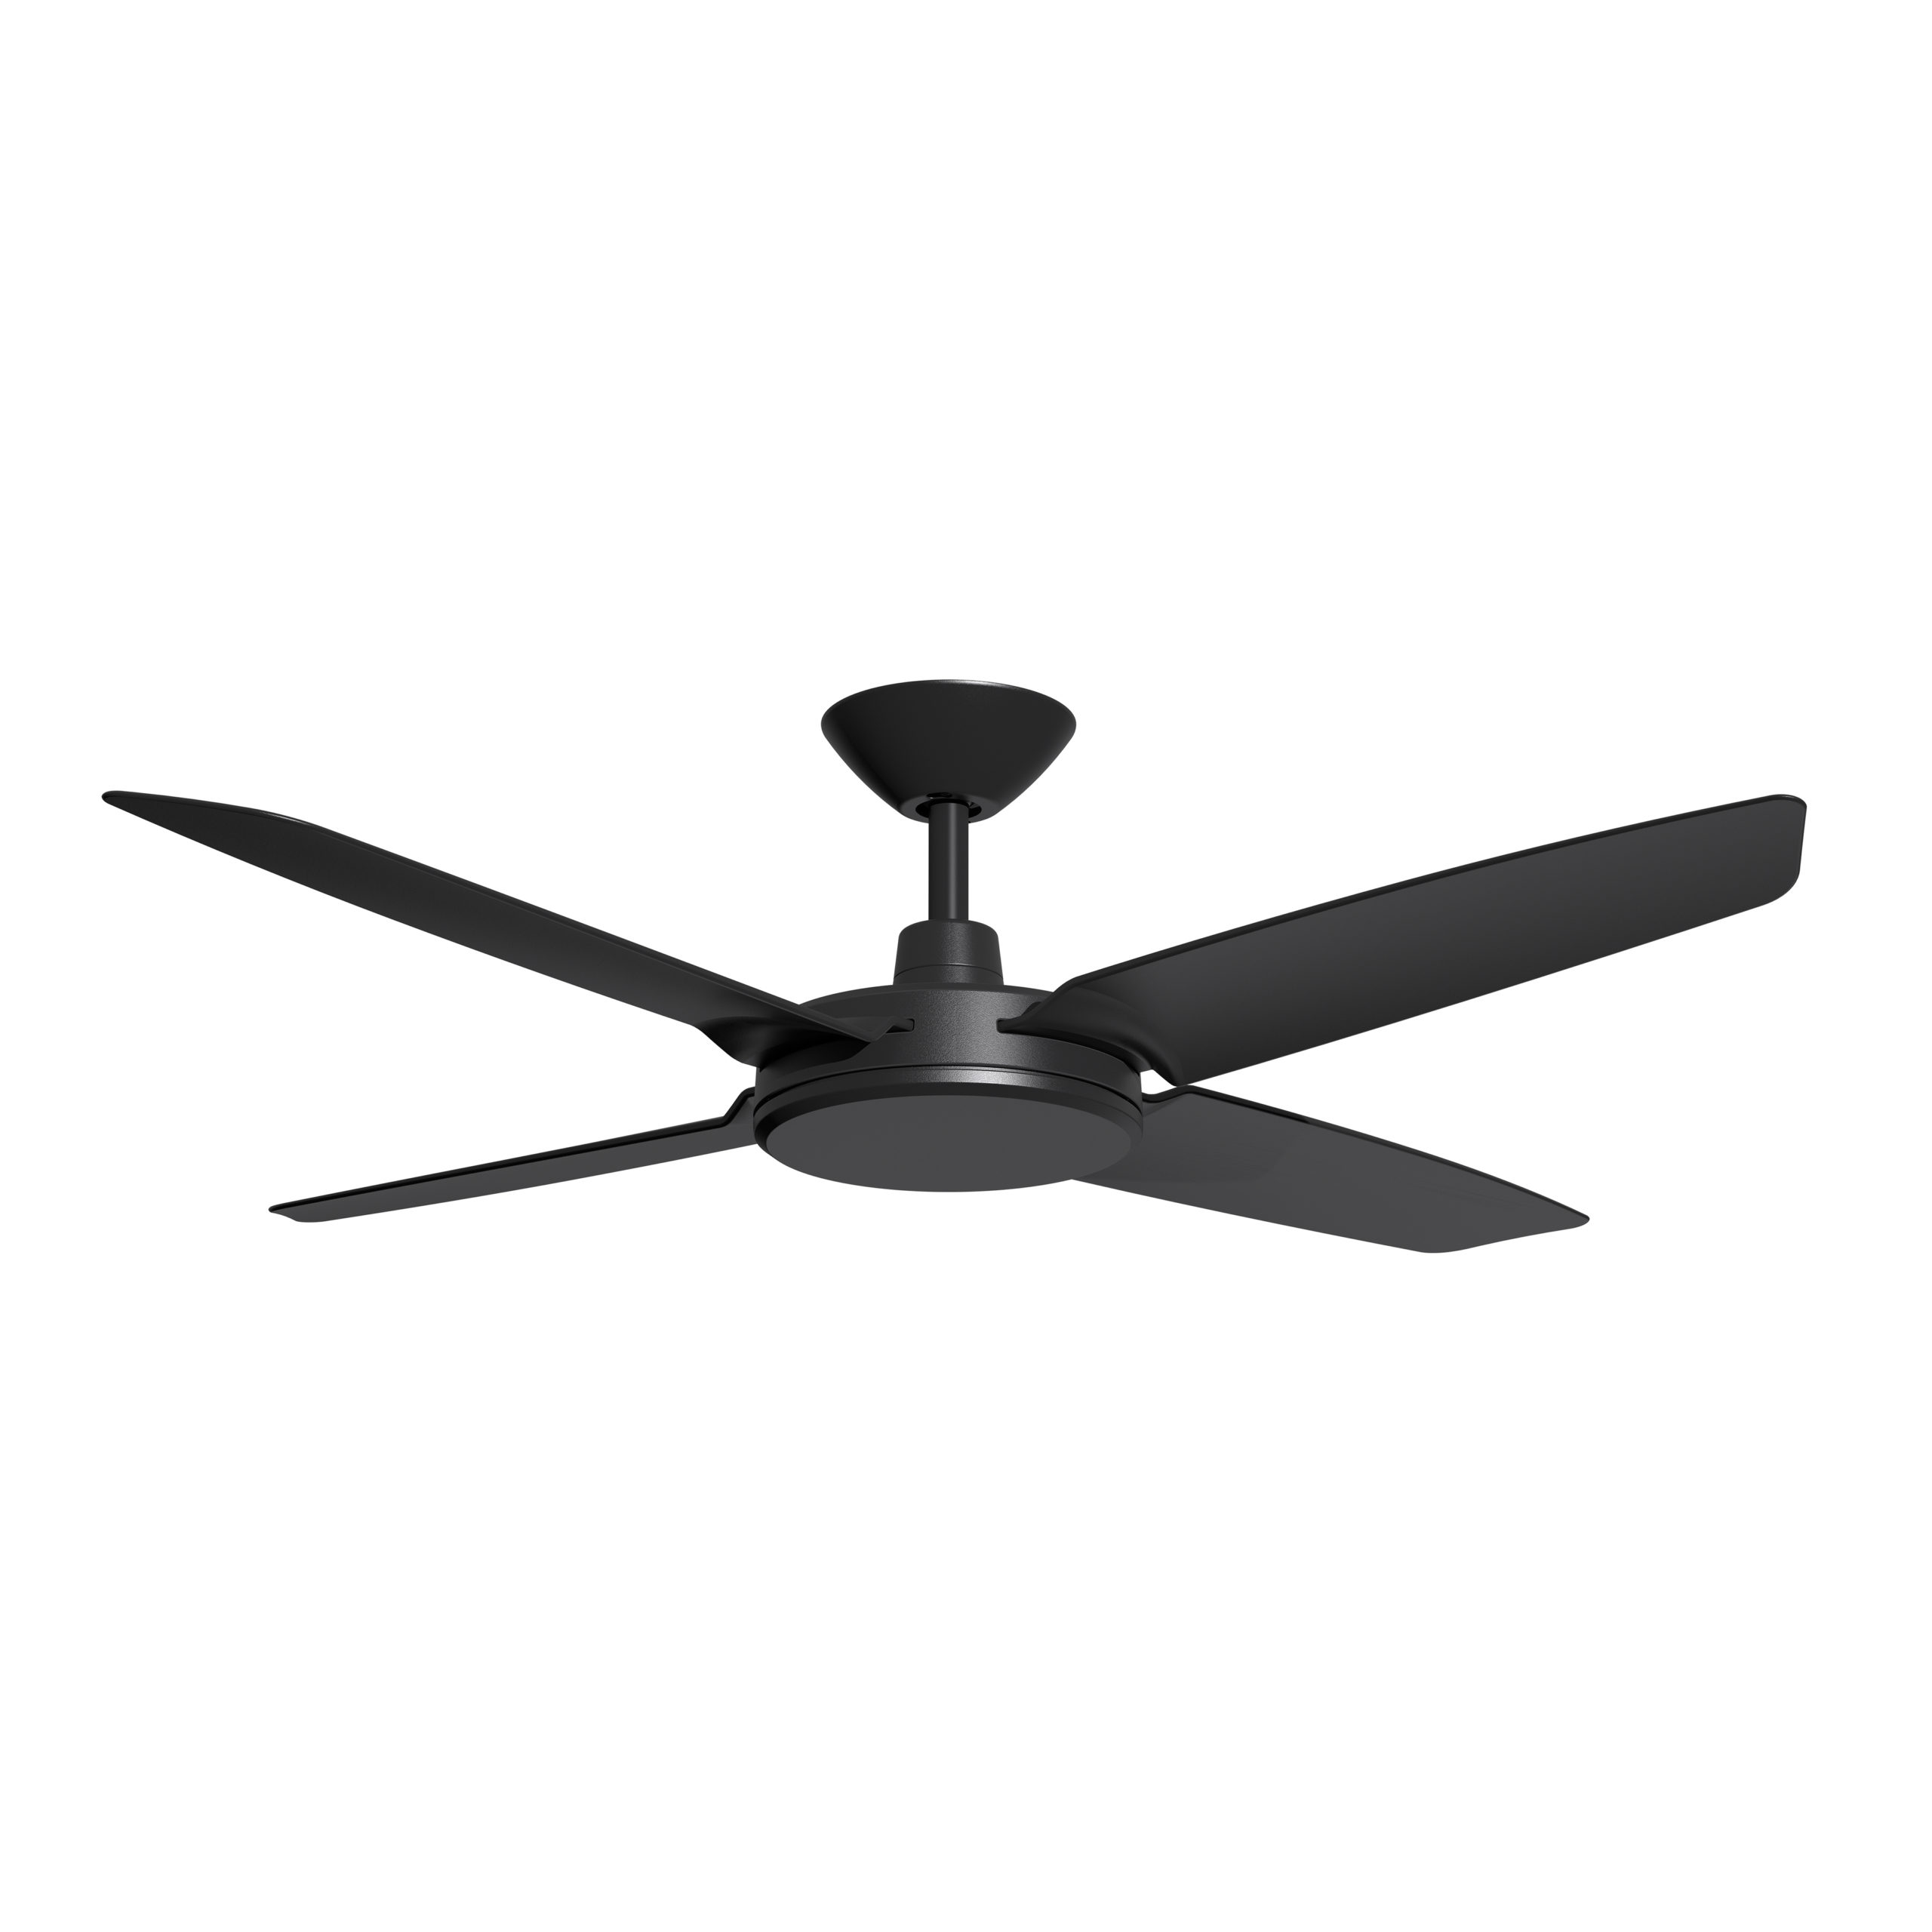 Enviro DC Indoor/Outdoor Ceiling Fan with CCT LED Light - Black 52